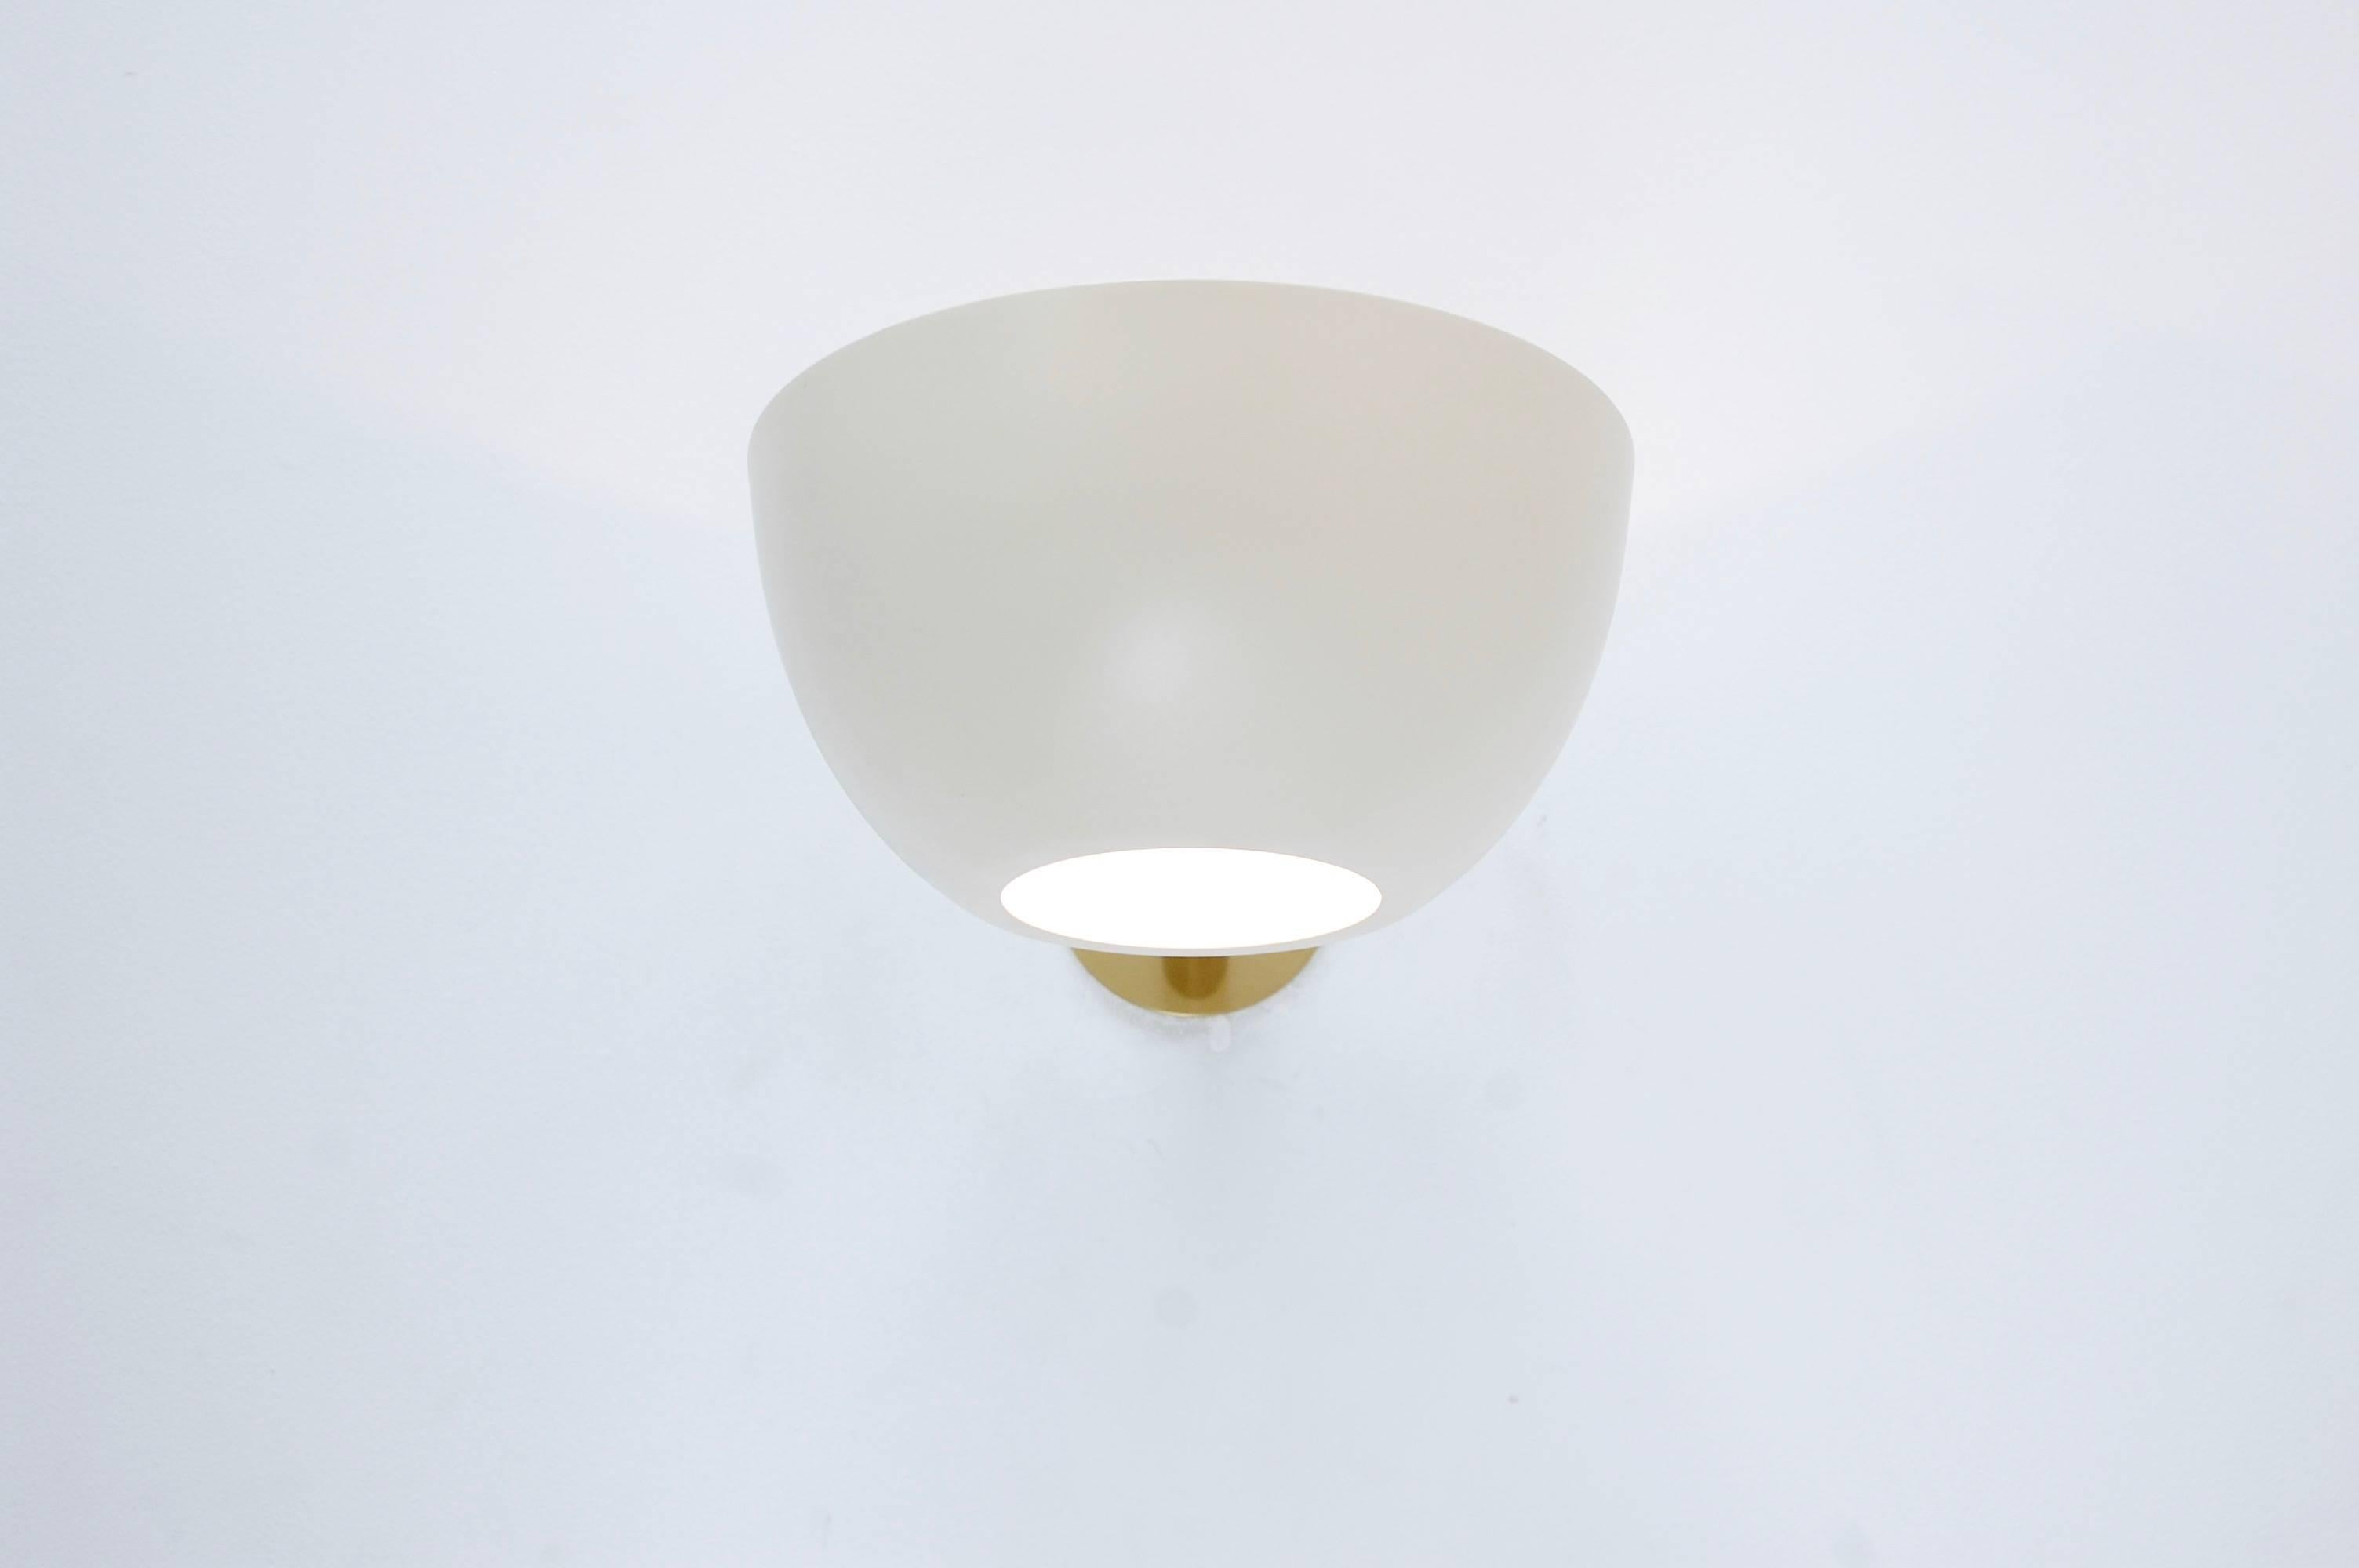 Inspired by 1950s Italian design, this contemporary sconce is a companion piece to our large LUcrown chandelier. Single medium based socket. Painted aluminum shade and lightly aged brass hardware with glass diffuser. Priced individually, multiples